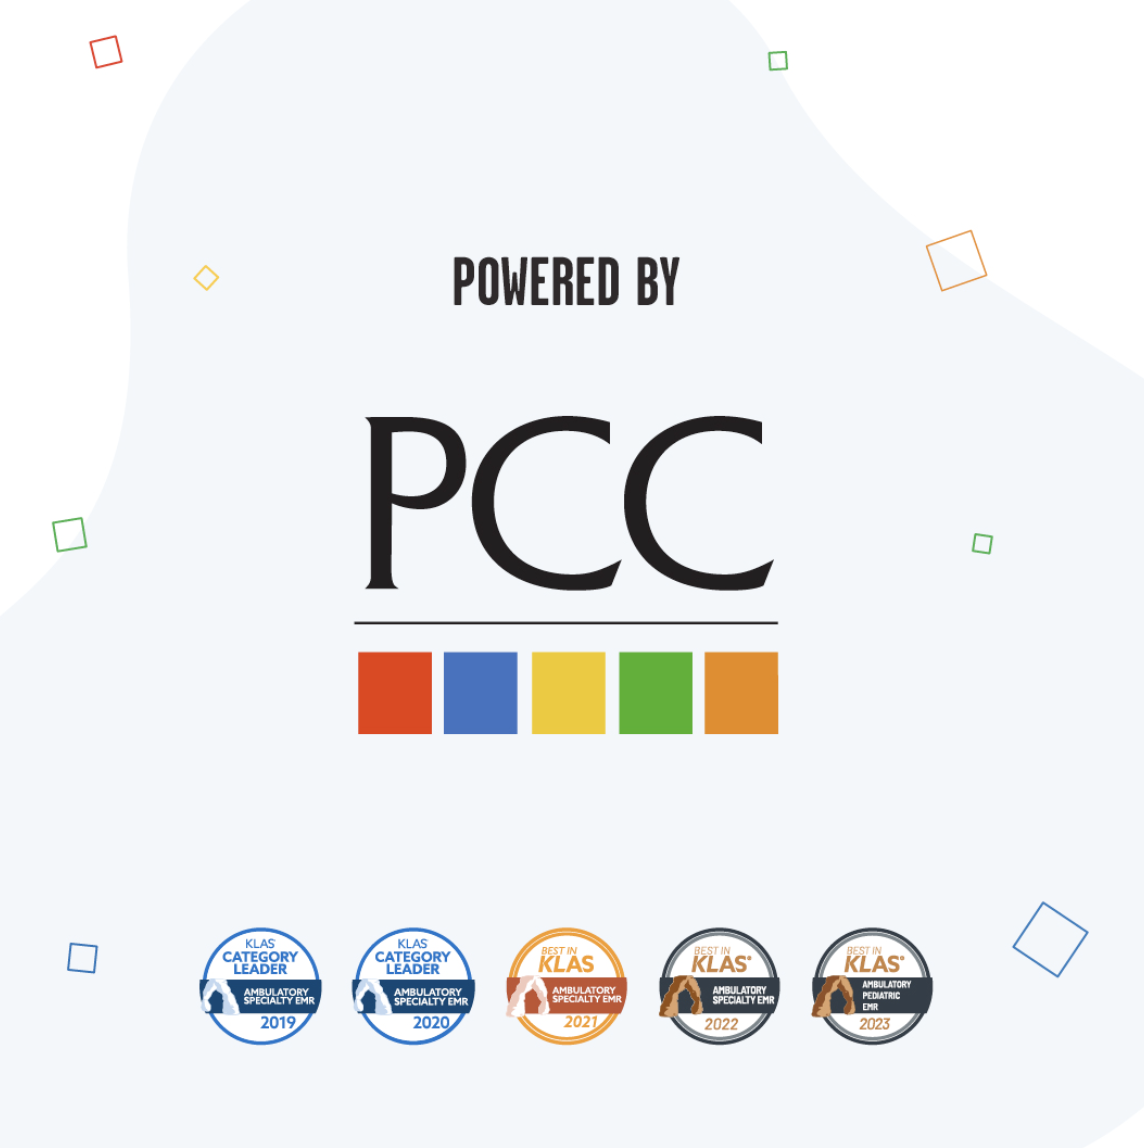 Powered by PCC